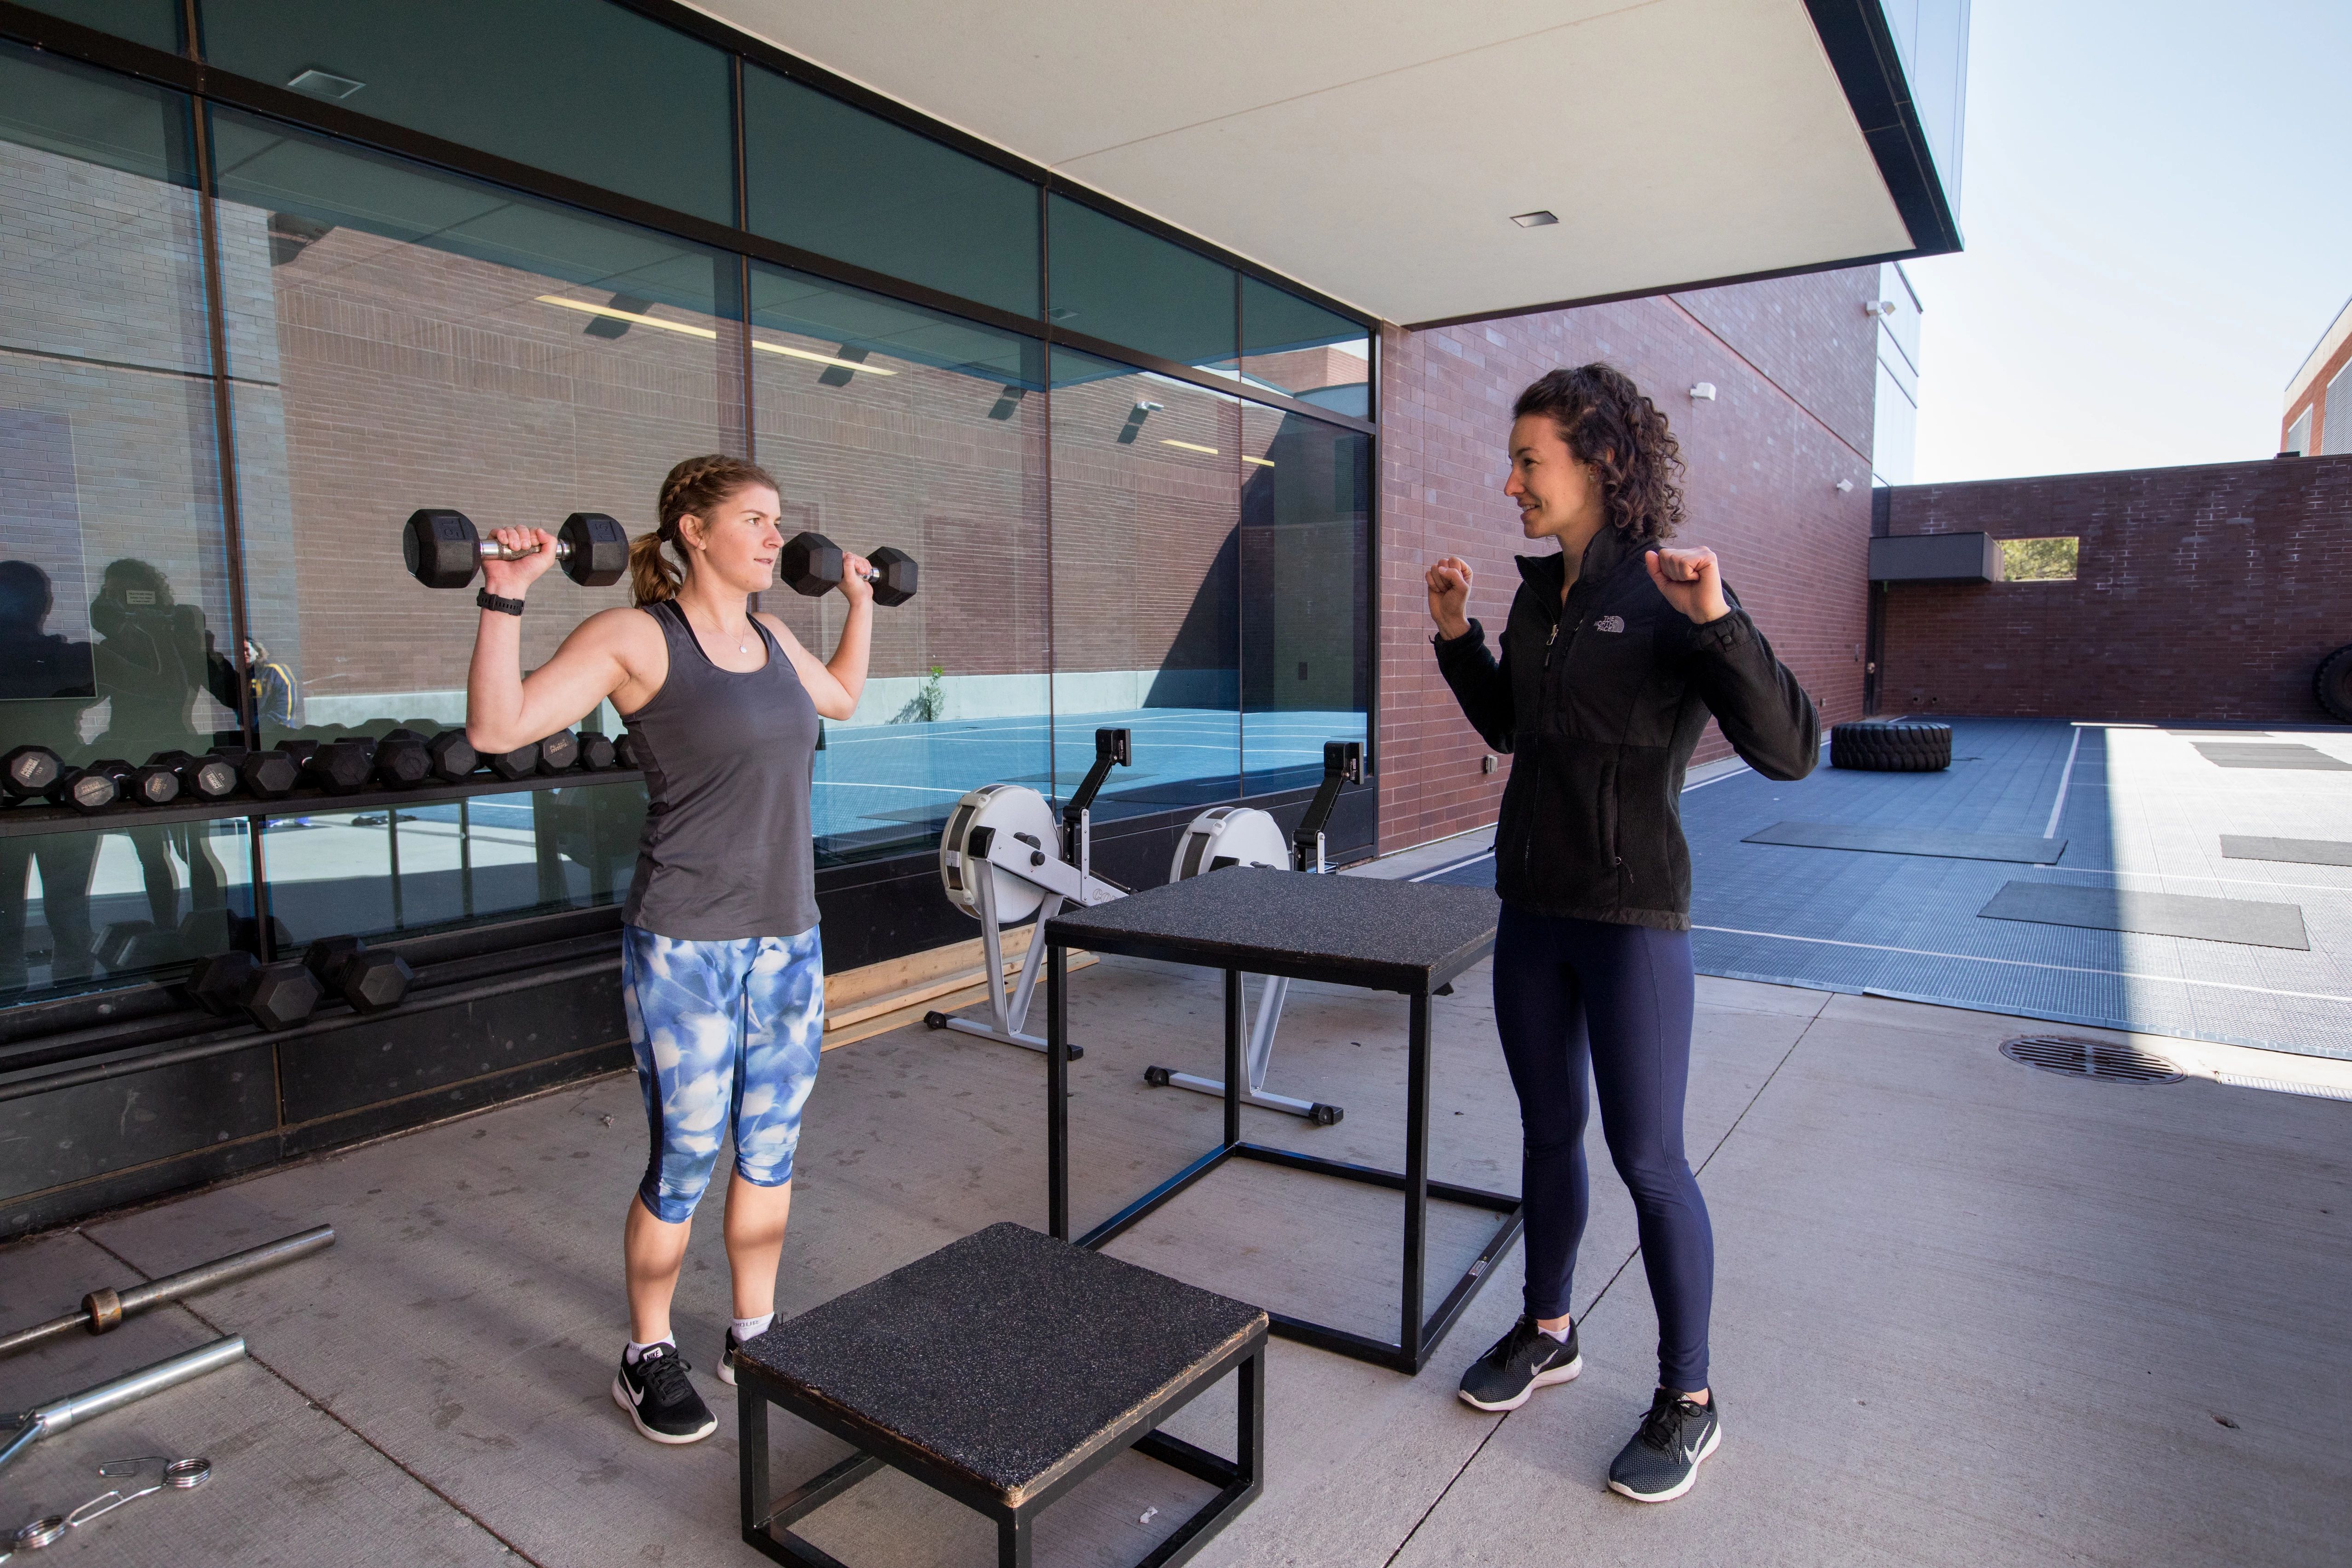 Trainer helping student with weight-lifting workout outside of campus recreation building.